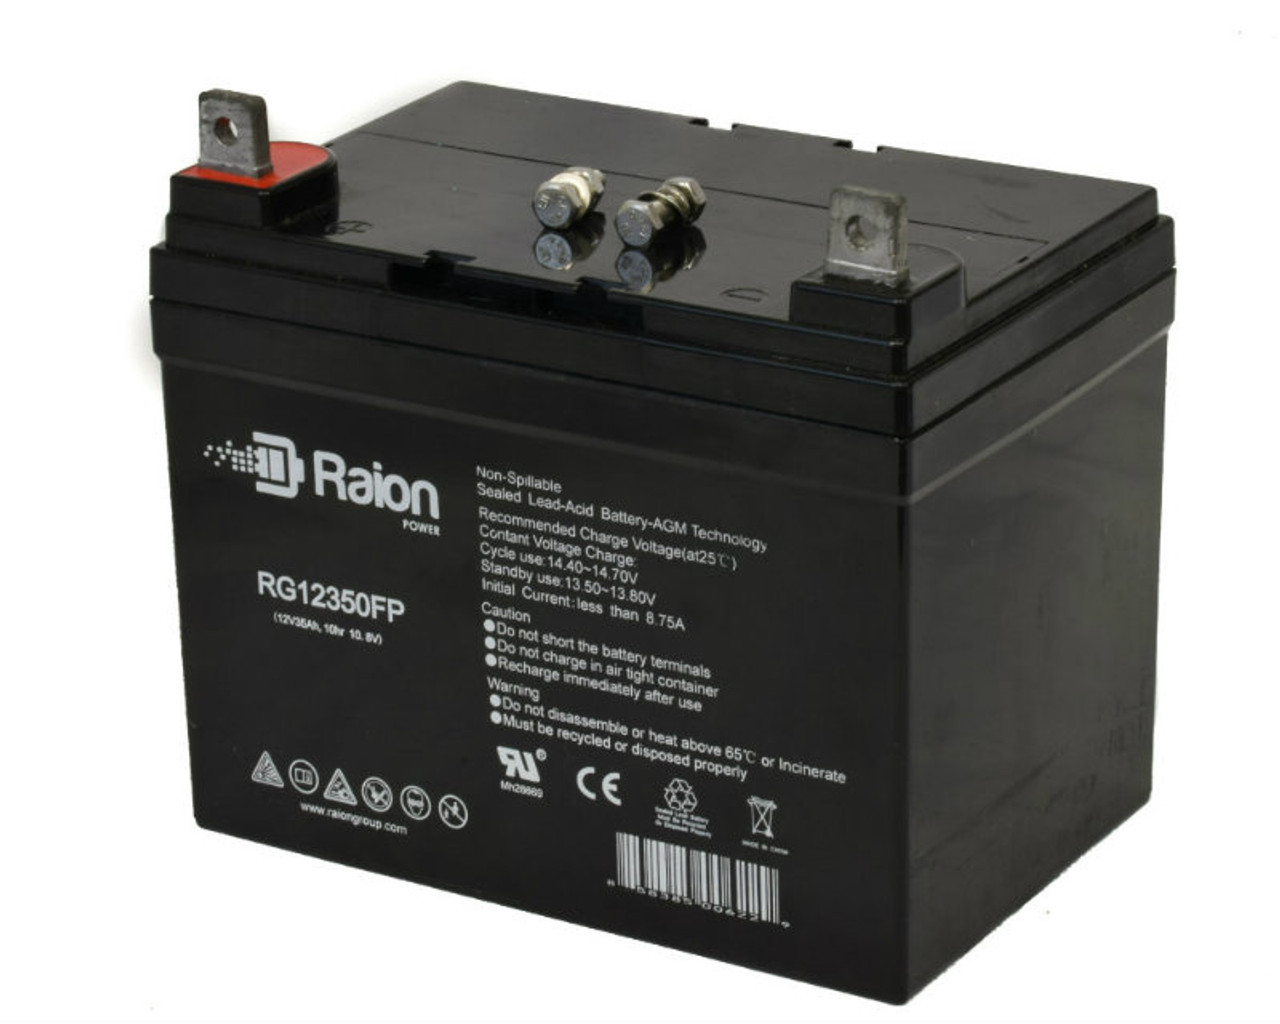 Raion Power Replacement 12V 35Ah Battery for Himalaya 6FM33 - 1 Pack